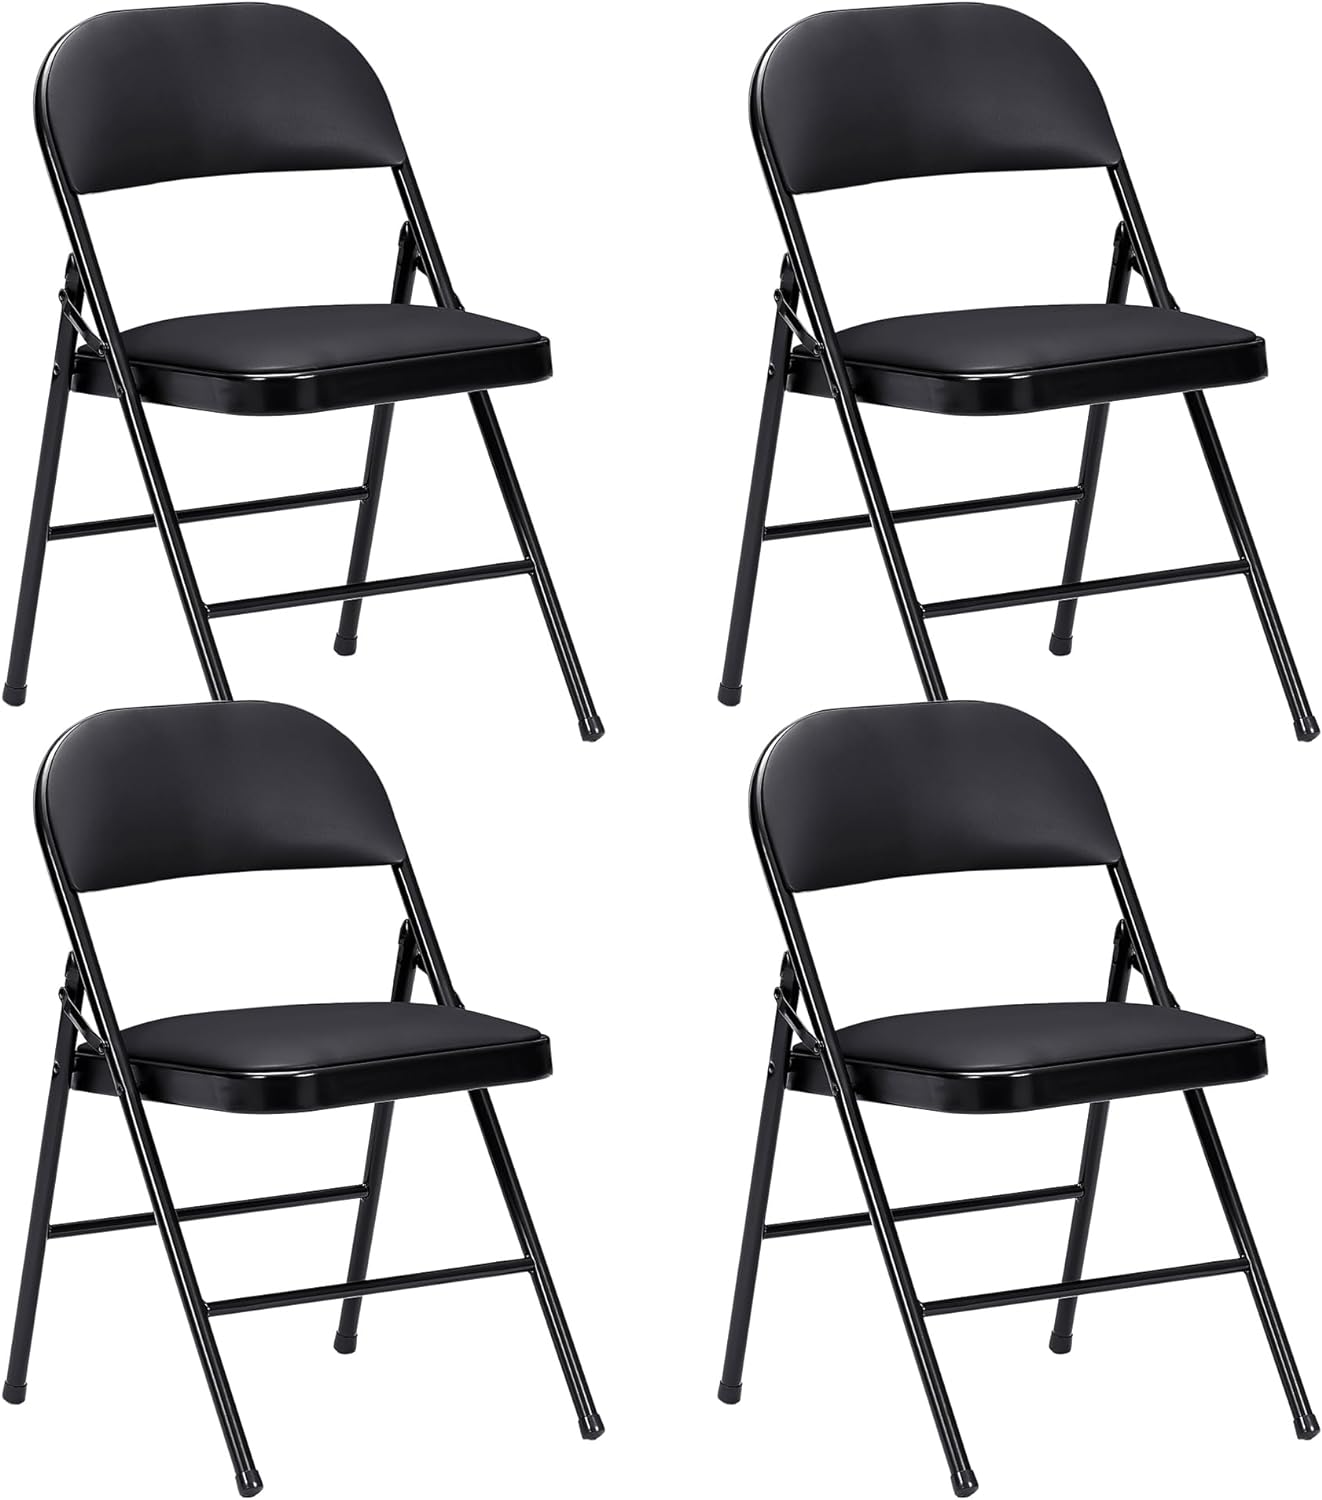 VECELO 4-Pack Folding Chairs Portable Metal with Ultra Soft PU Padded Cushion Seats